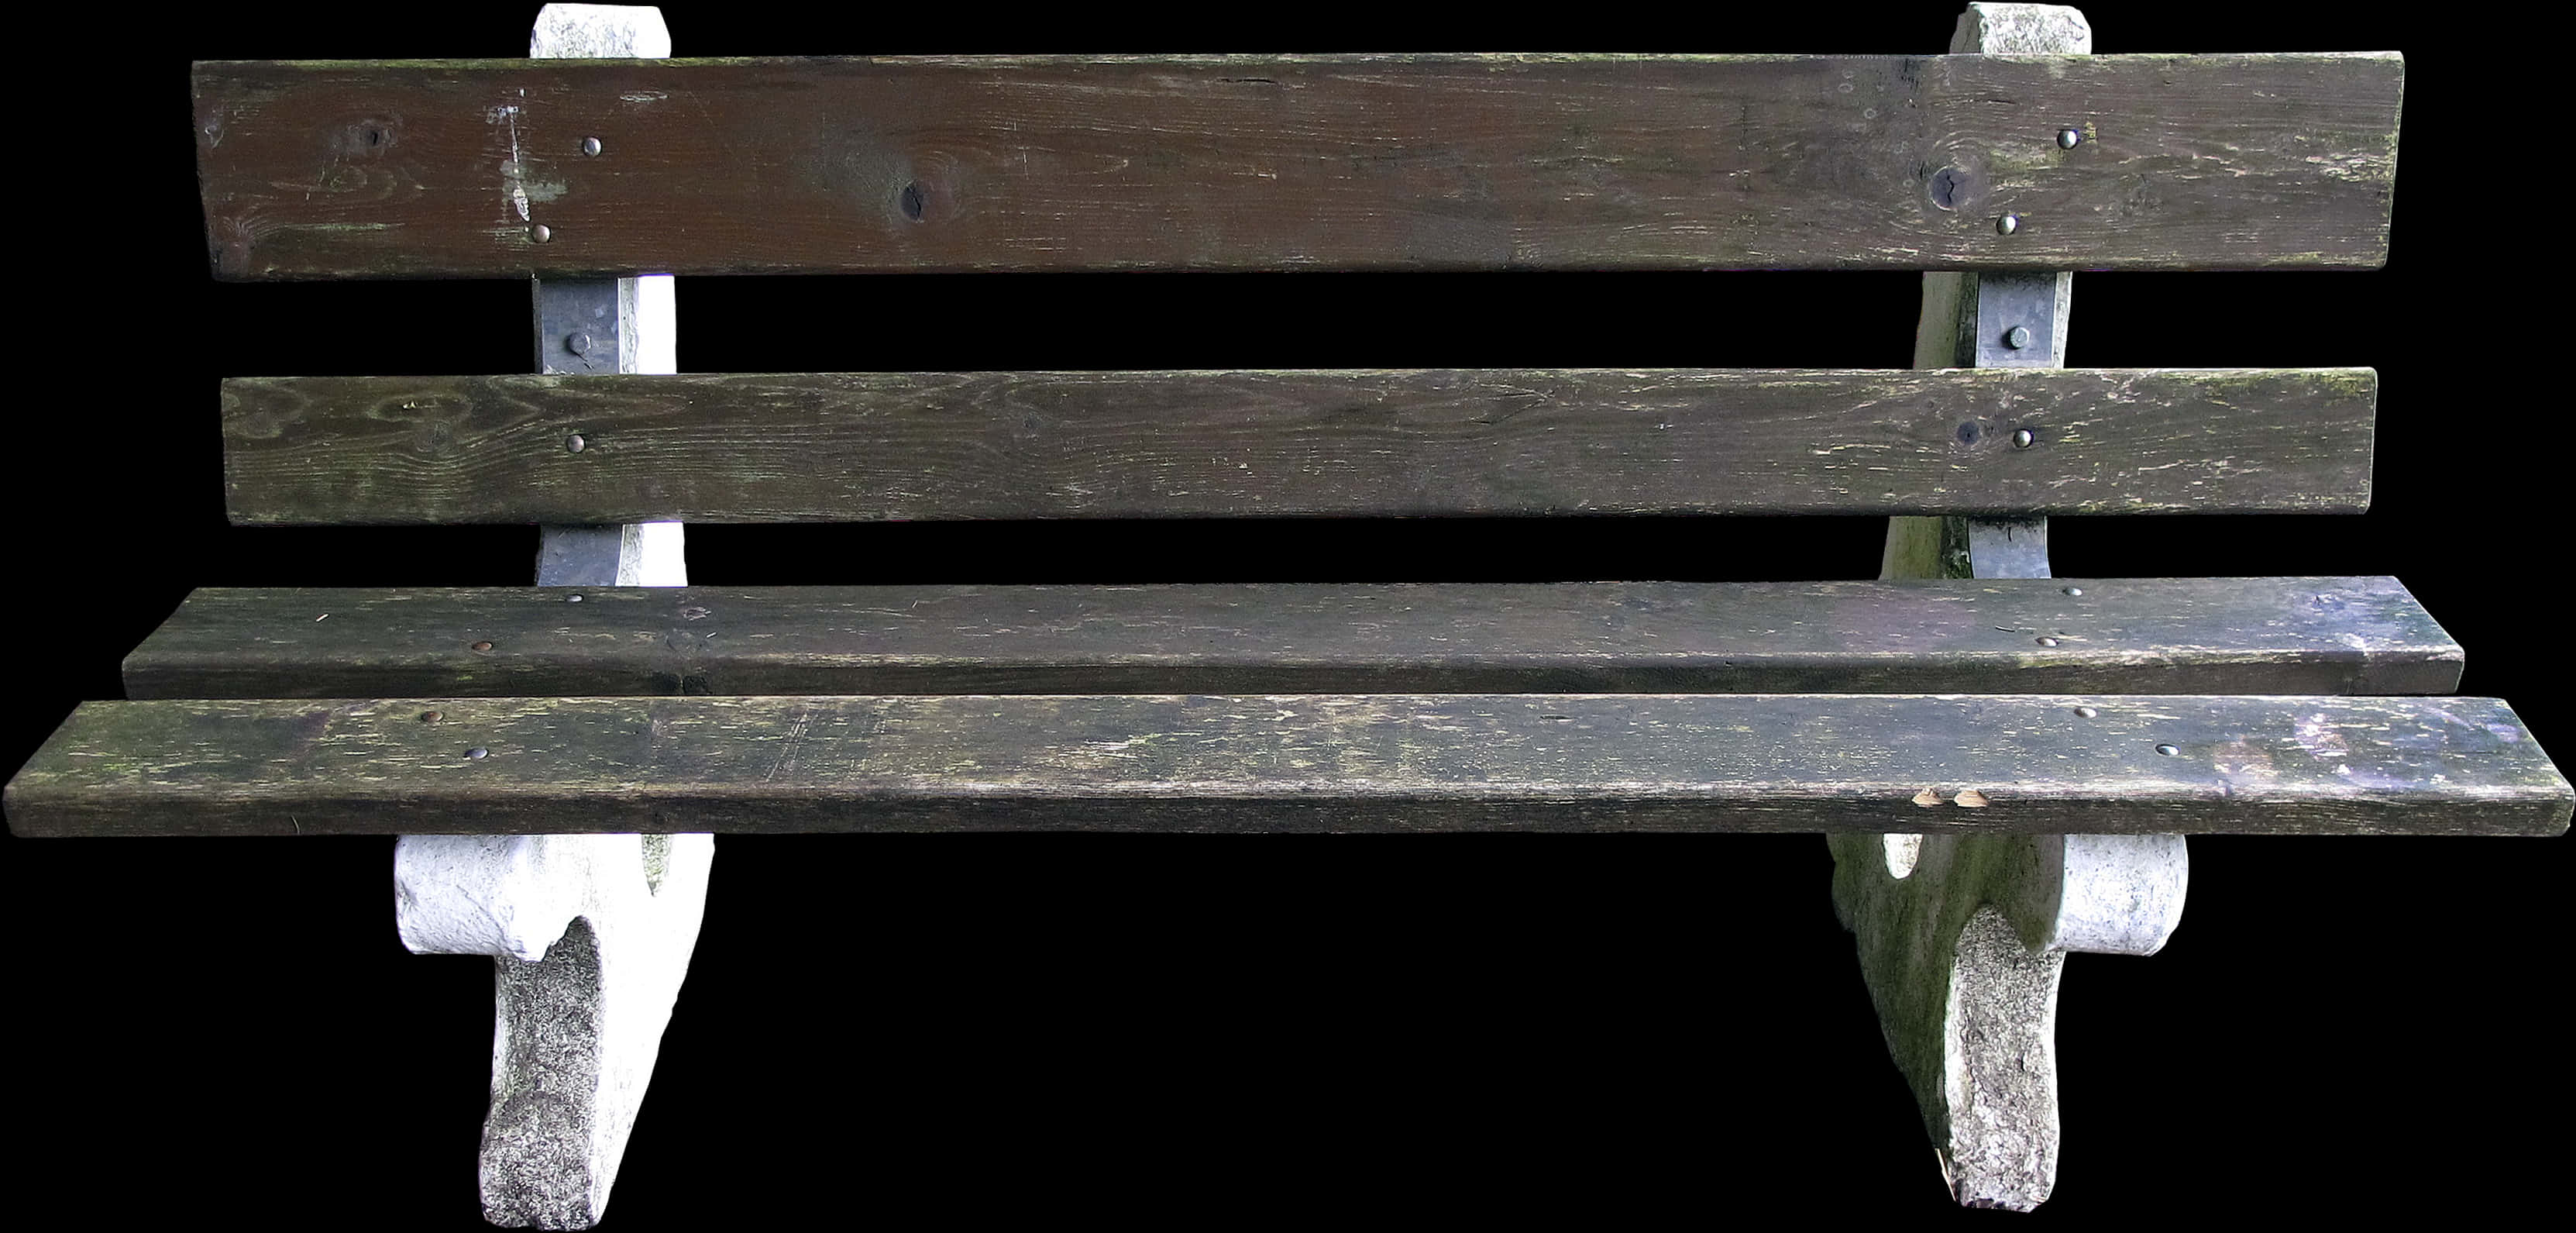 A Wooden Bench With White Legs